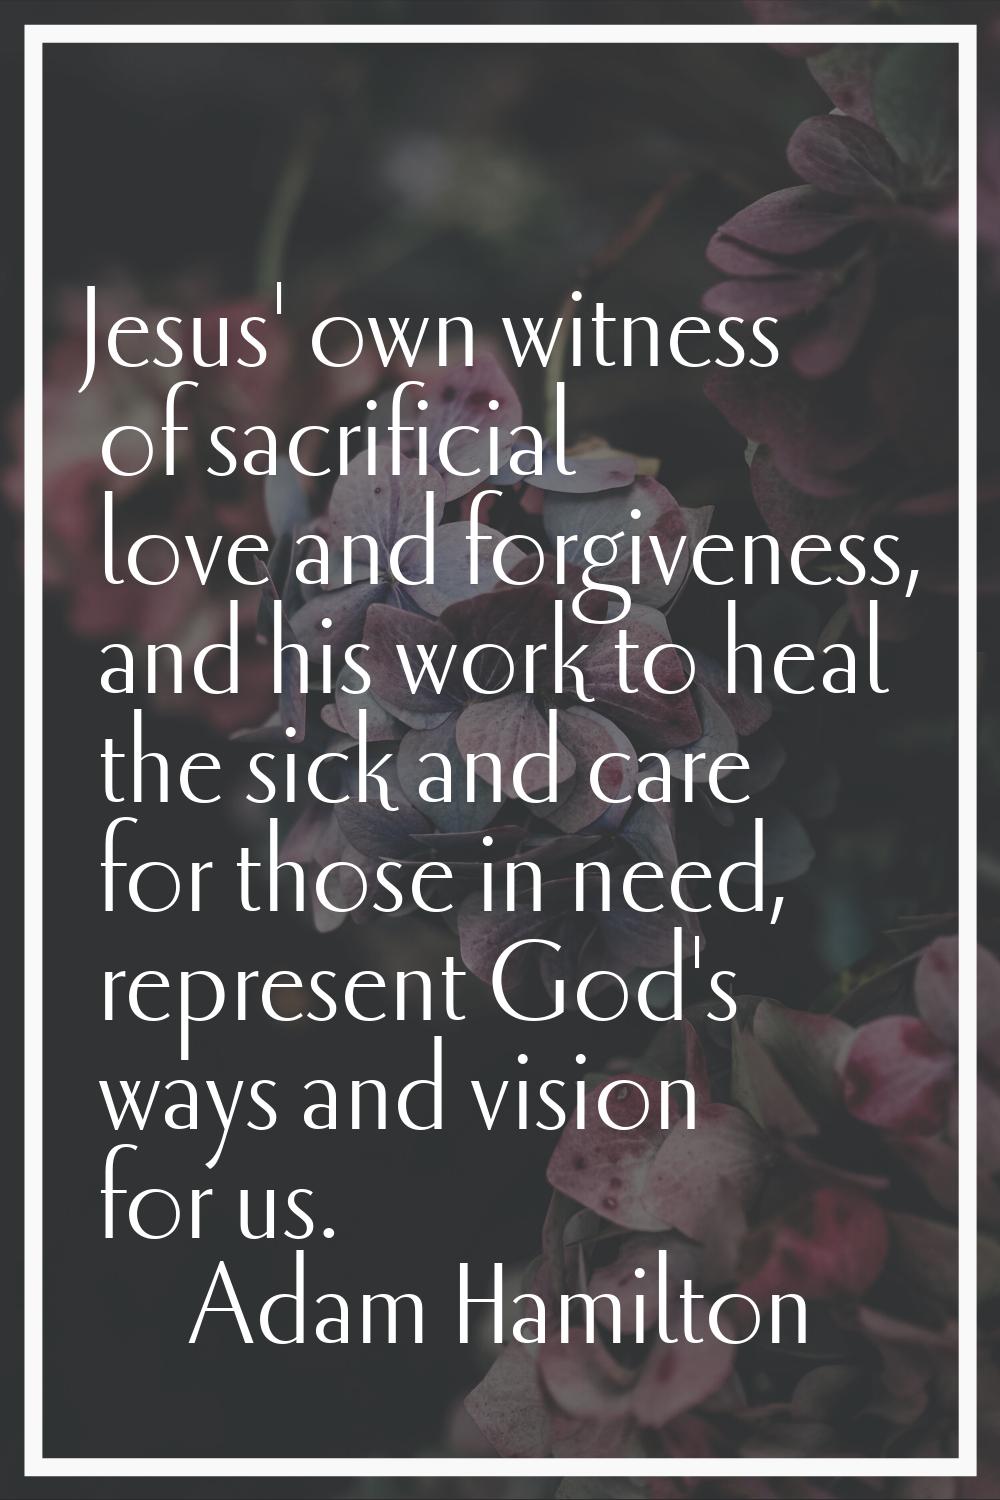 Jesus' own witness of sacrificial love and forgiveness, and his work to heal the sick and care for 